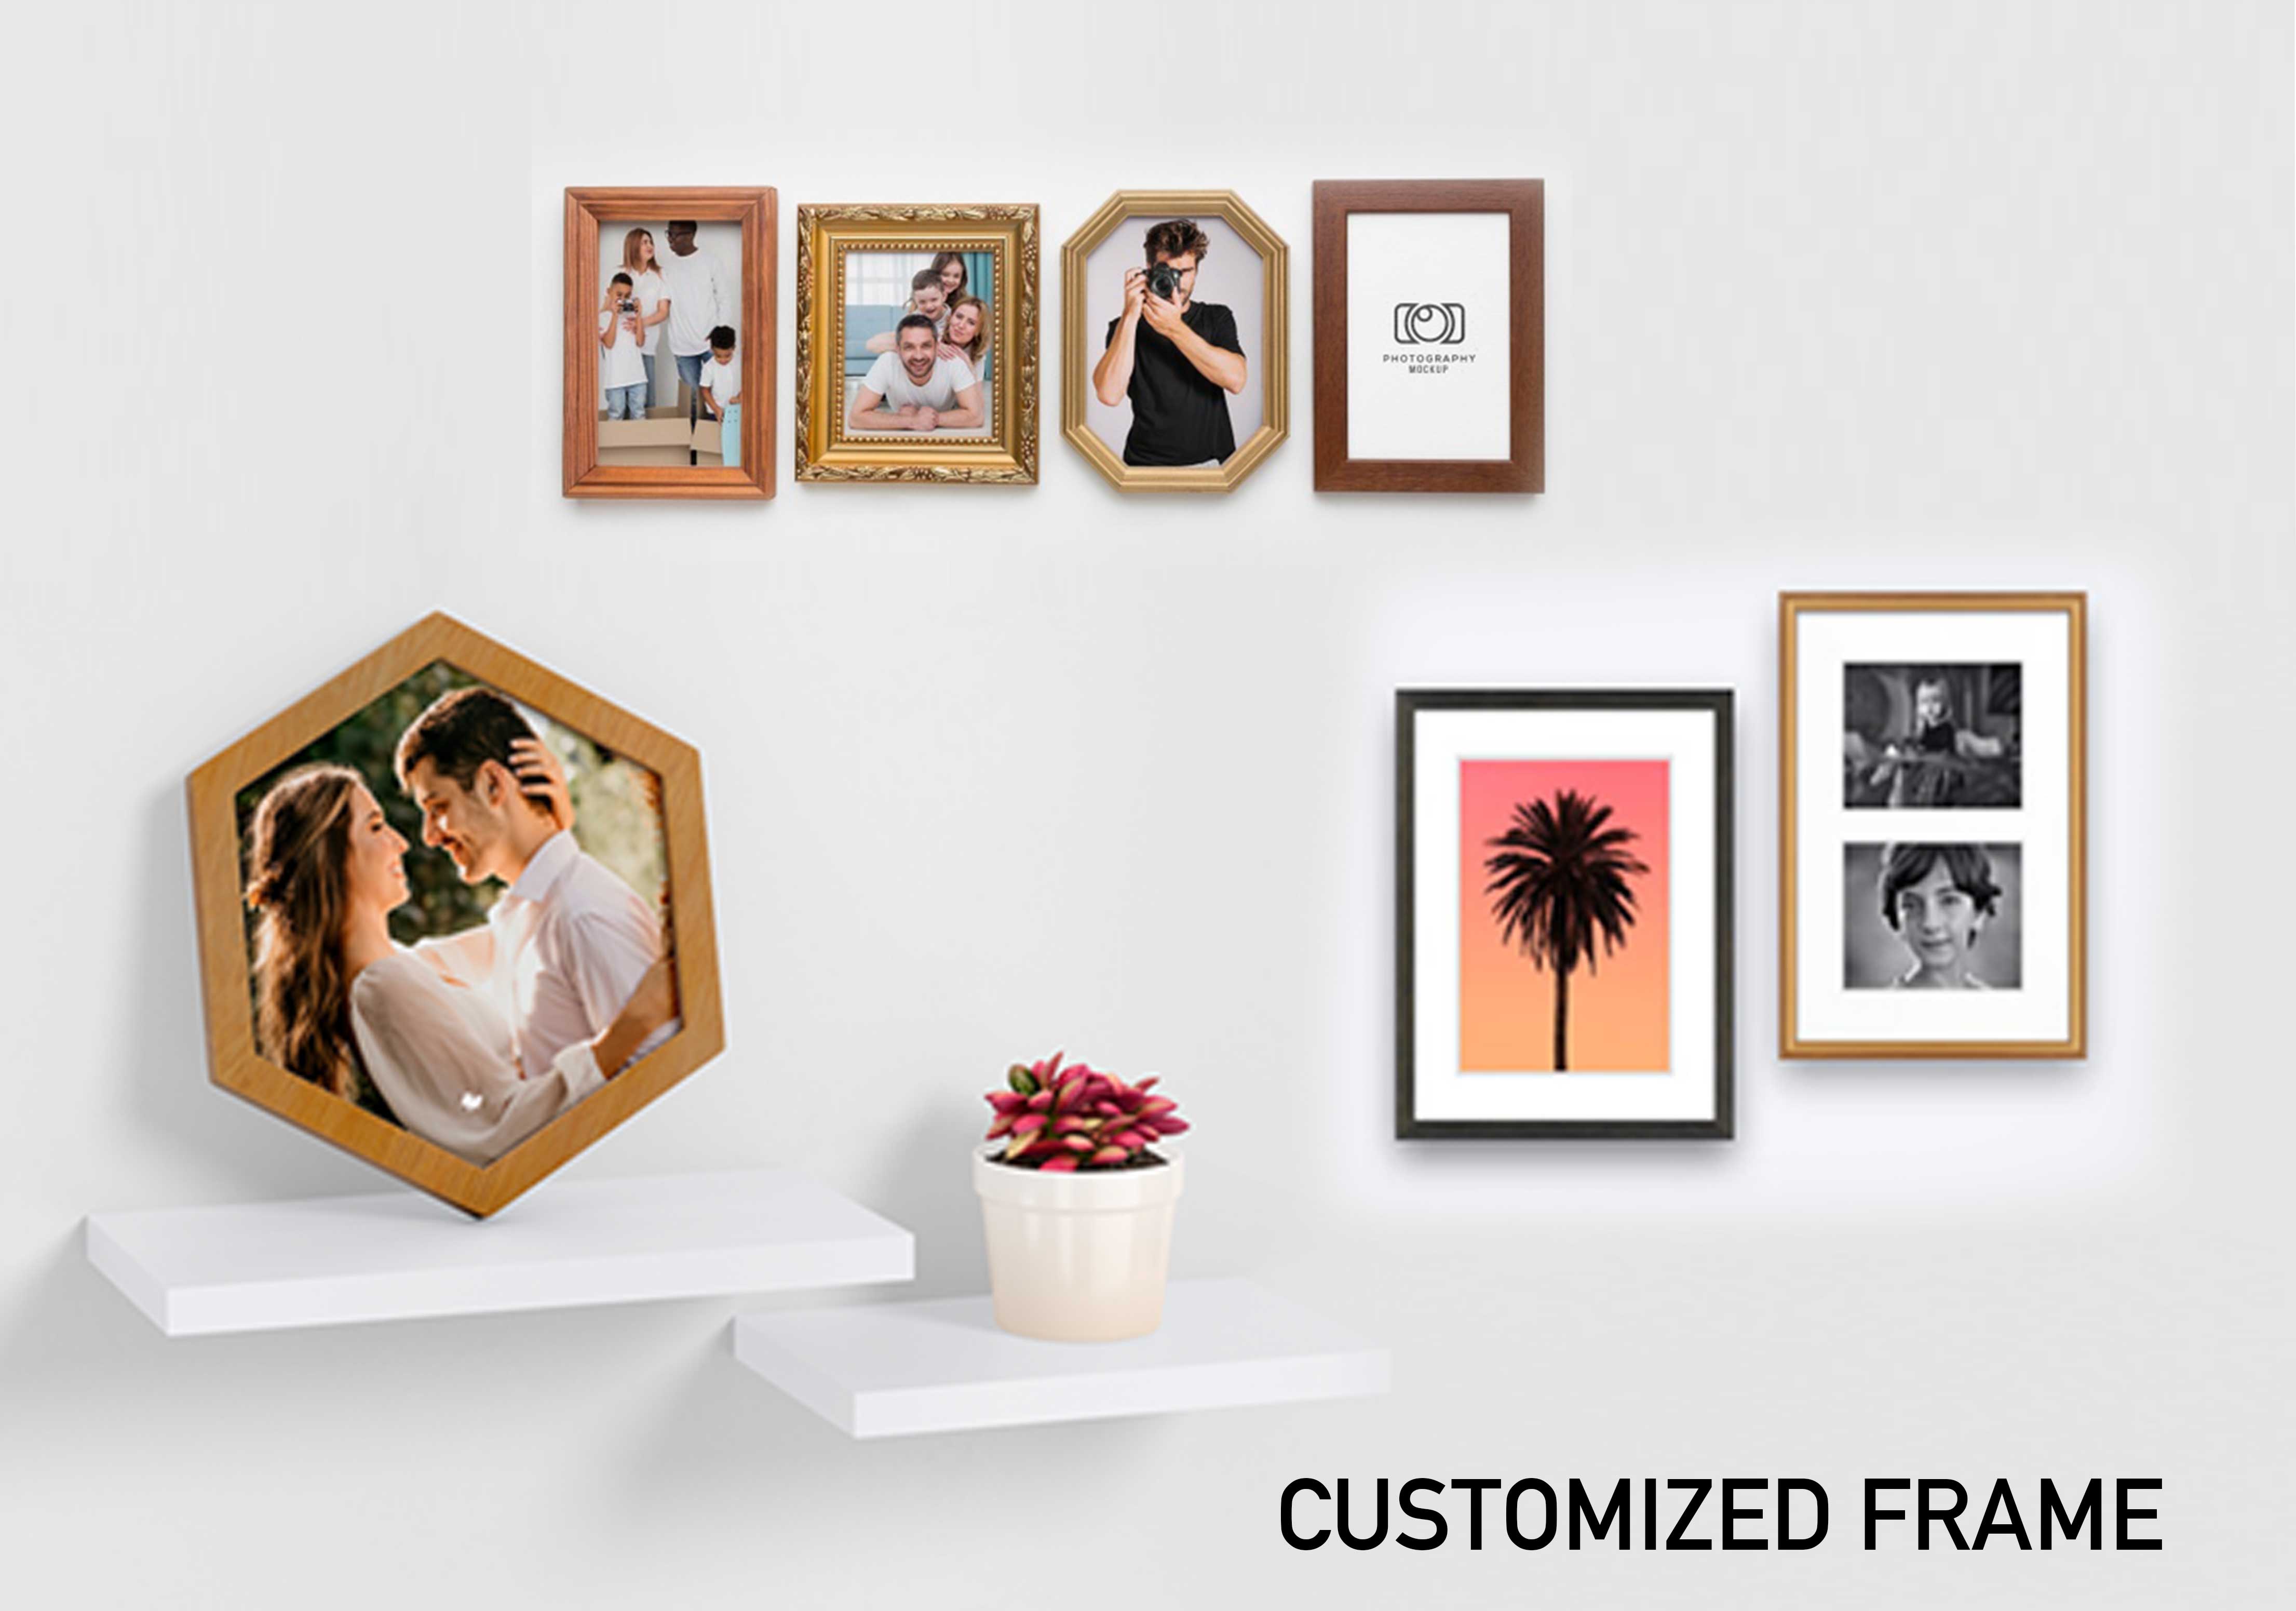 Customized frame at Golden Point adds 